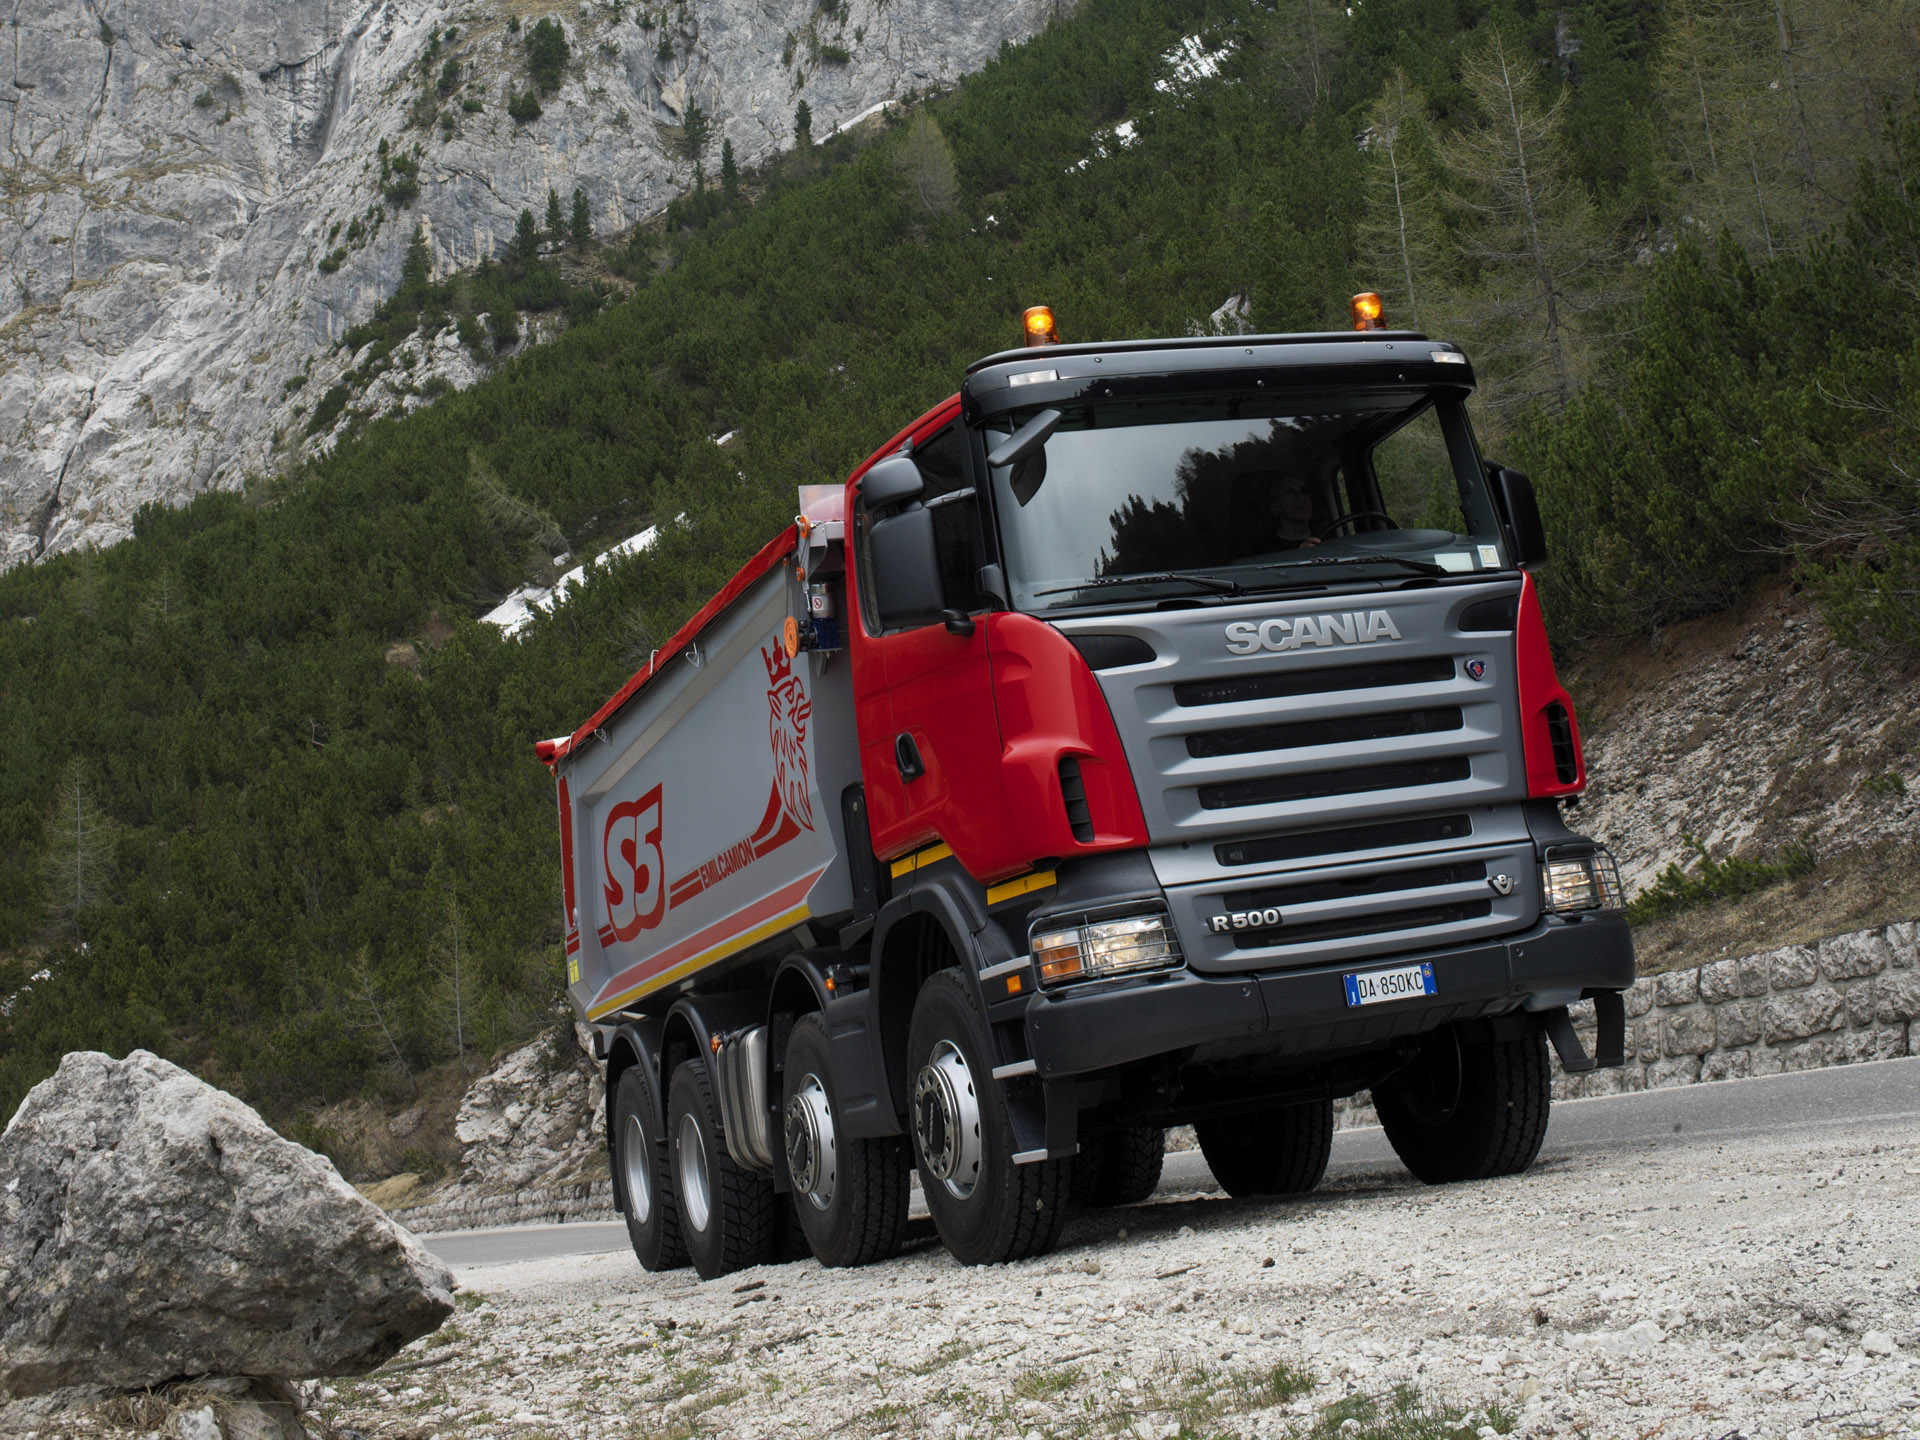 Scania R Series Picture 67963 Scania Photo Gallery 8569